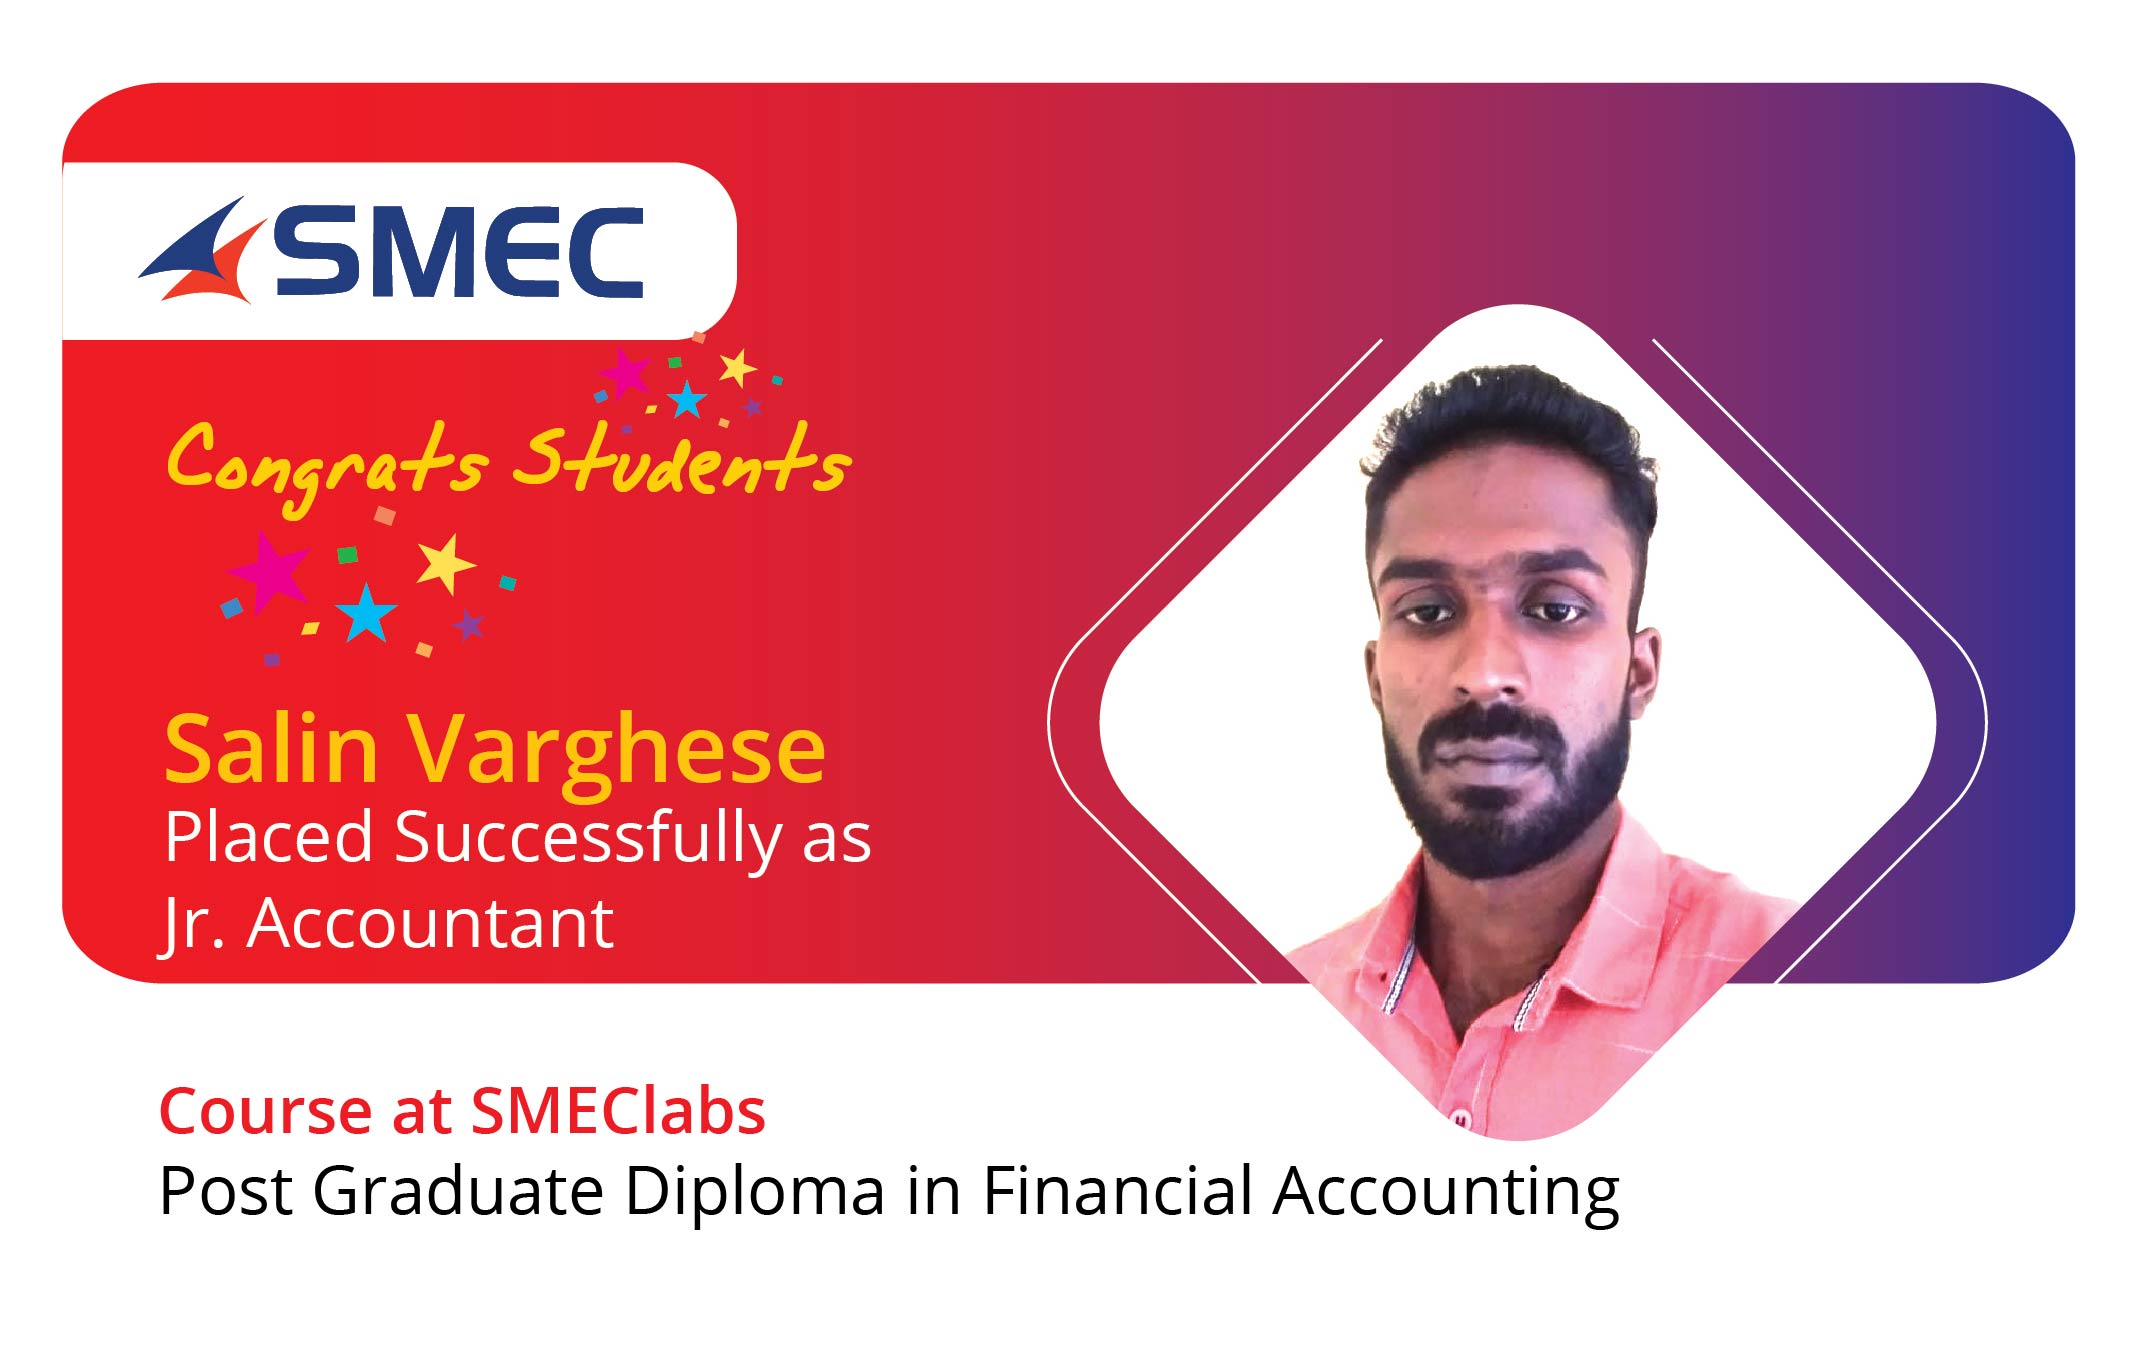 Salin Varghese got Placed from SMEC as Jr. Accountant